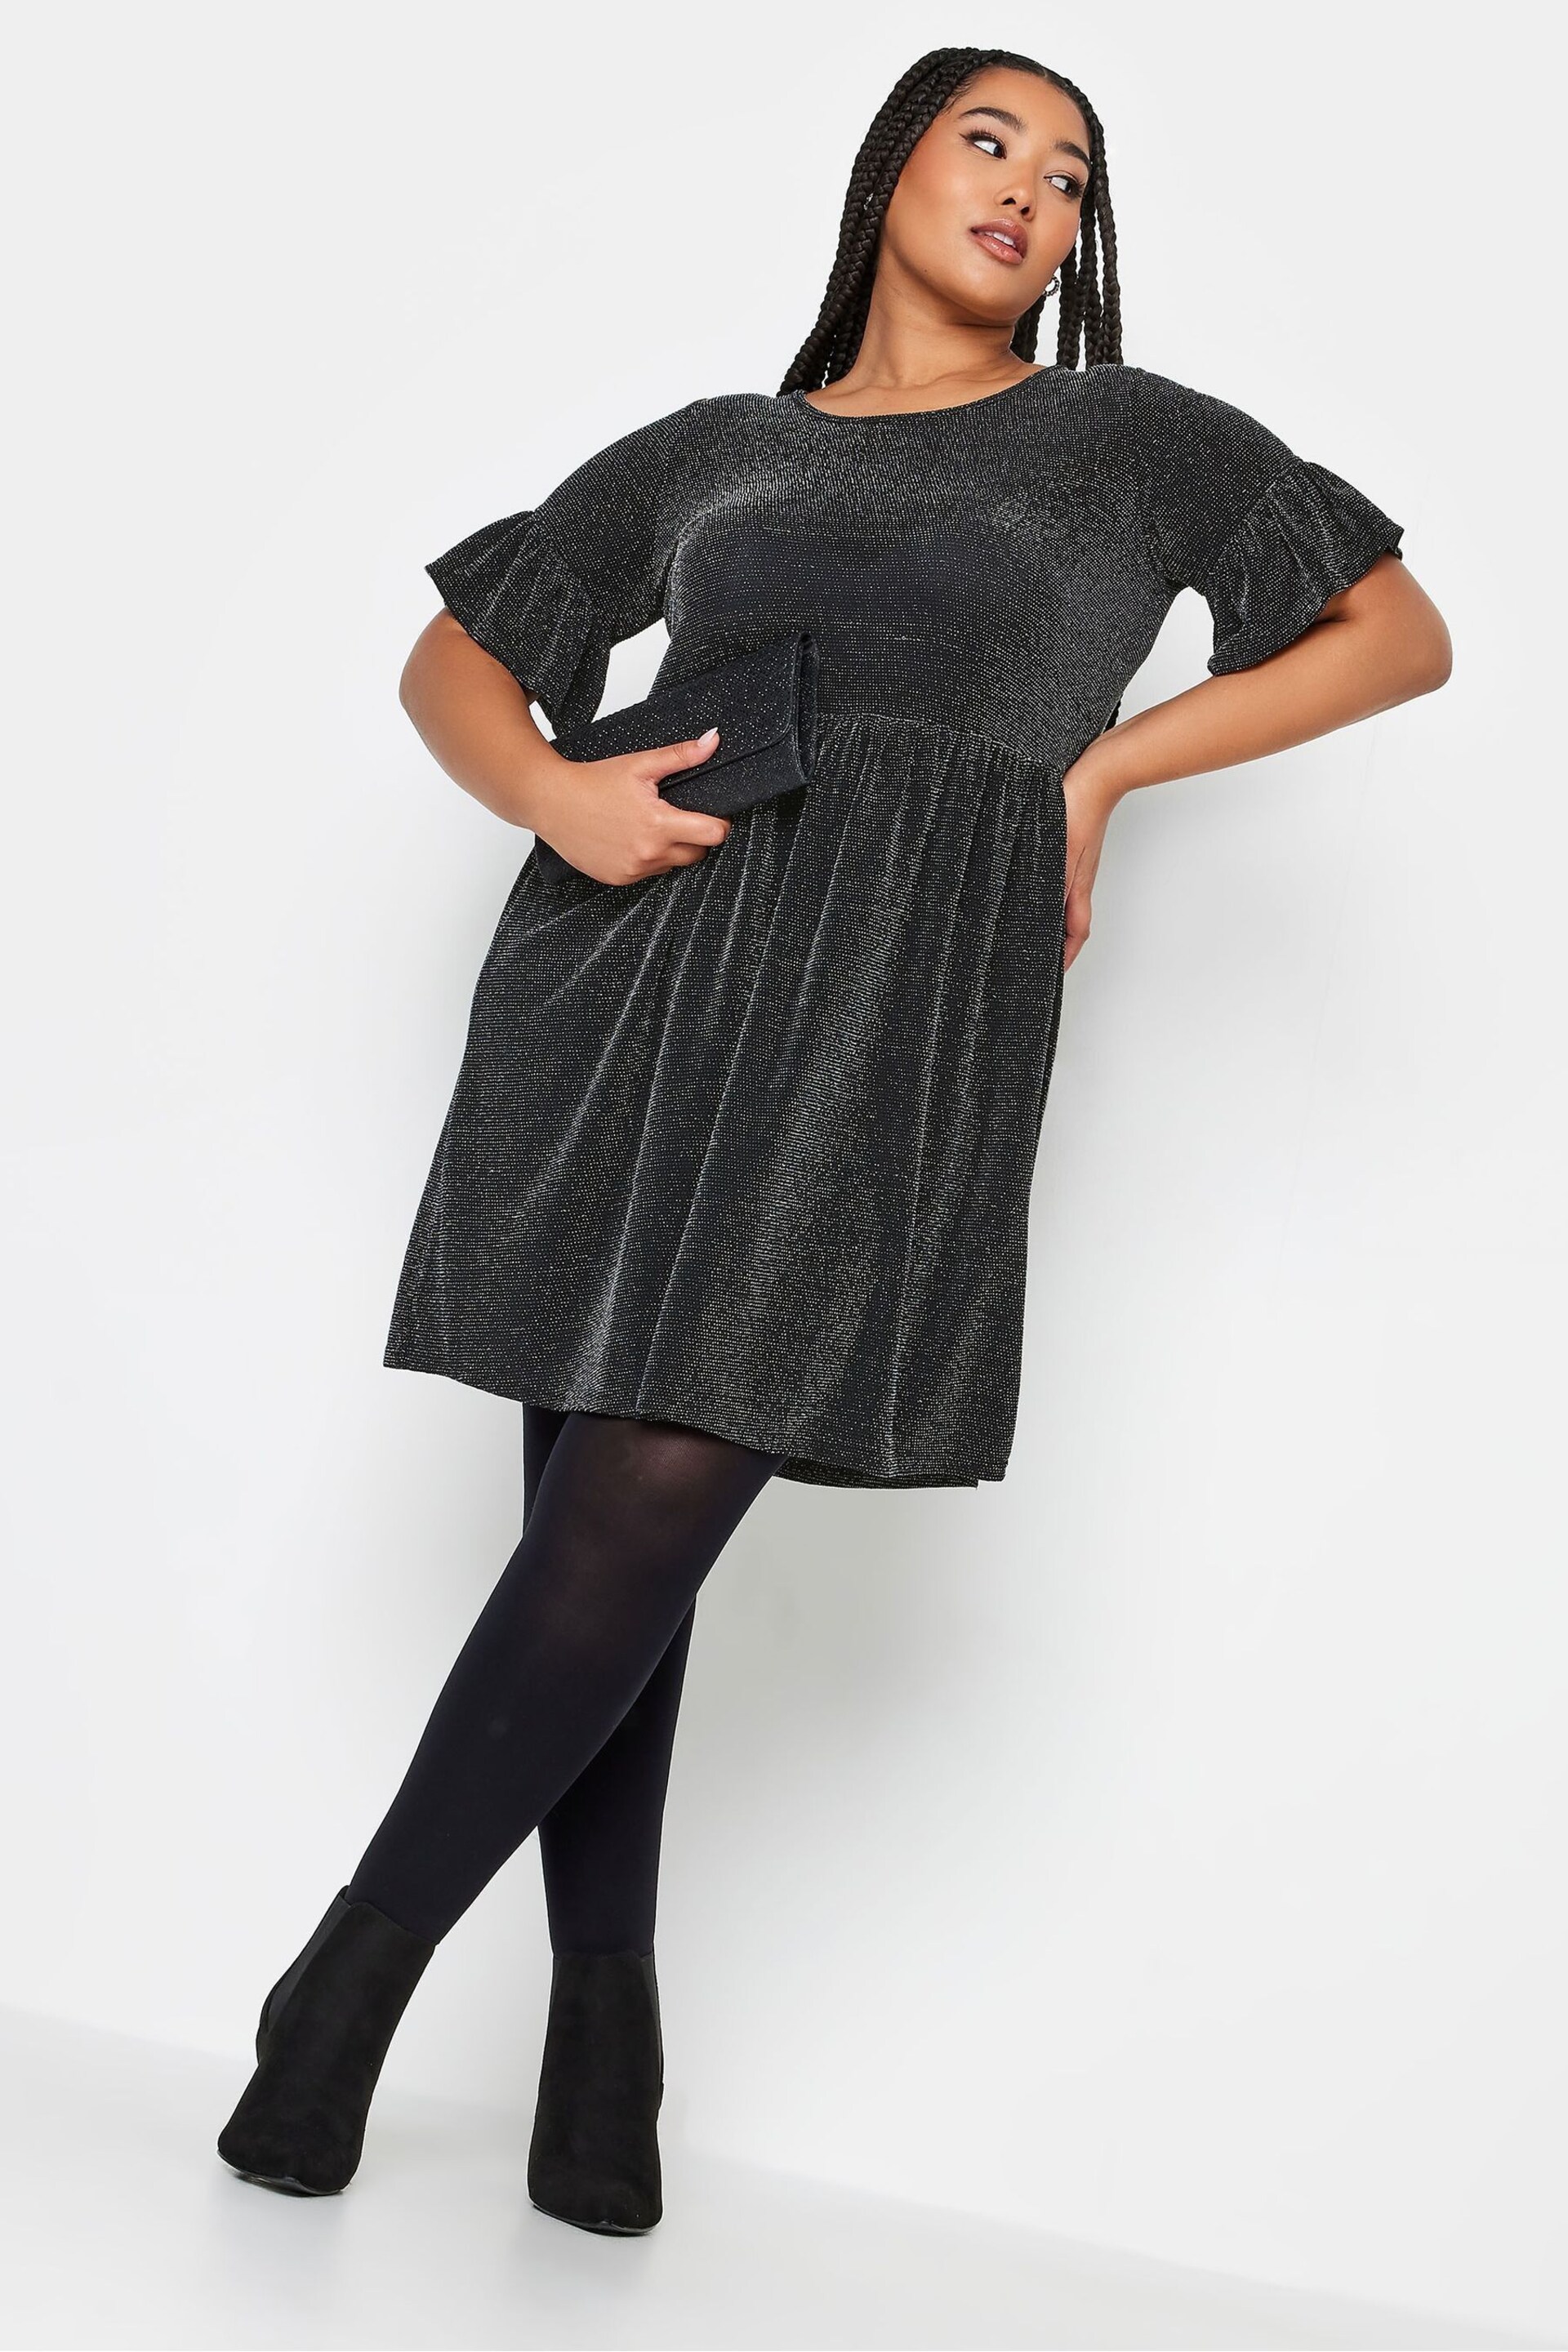 Yours Curve Black Peplum Frill Tunic - Image 3 of 4